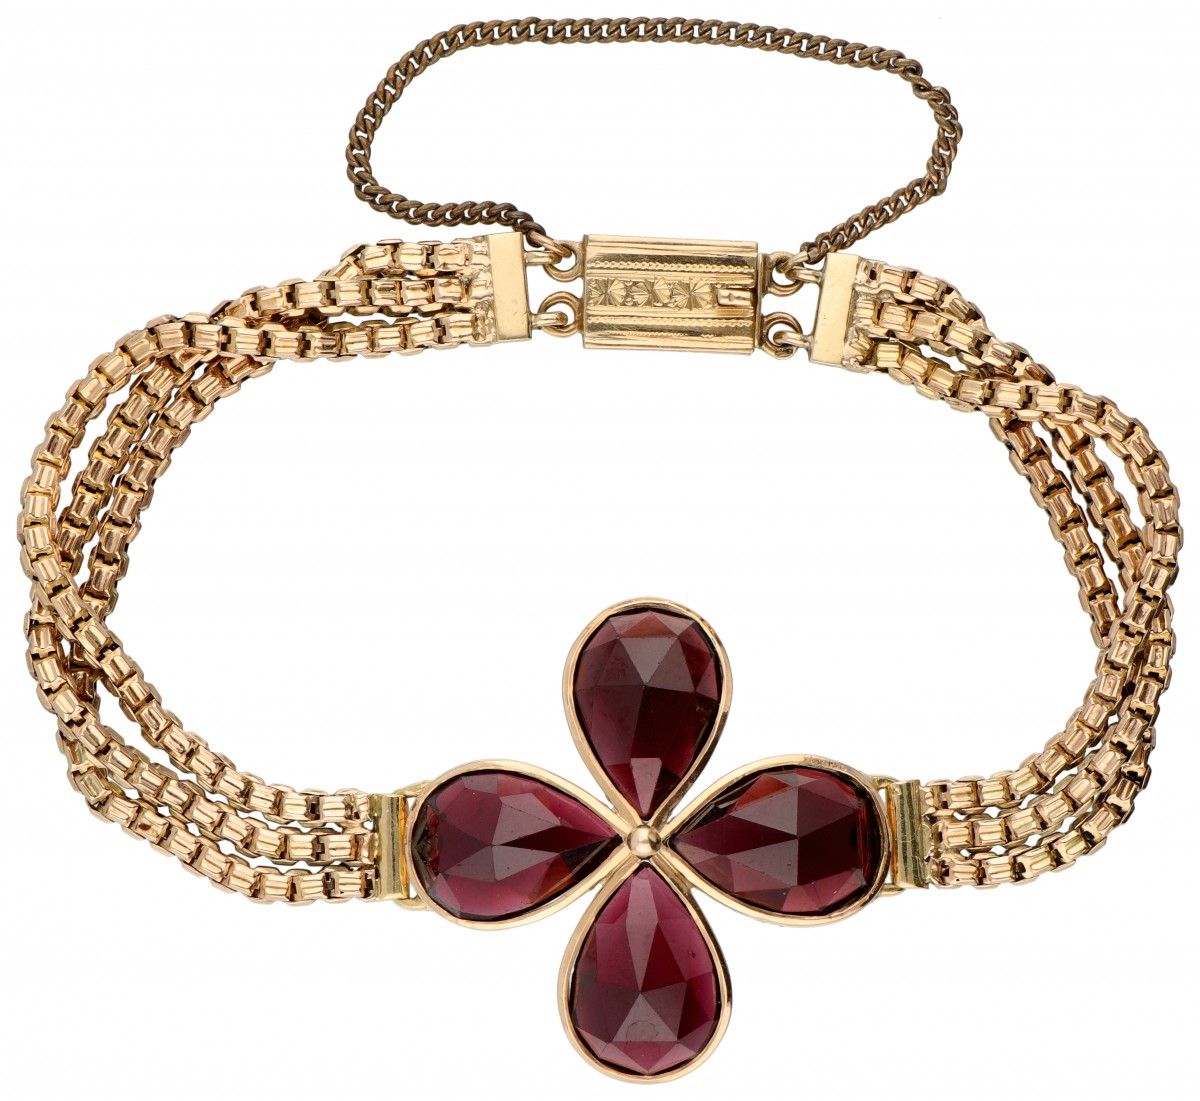 14K. Yellow gold bracelet set with approx. 15.88 ct. Garnet. Marchi: 585. Con ca&hellip;